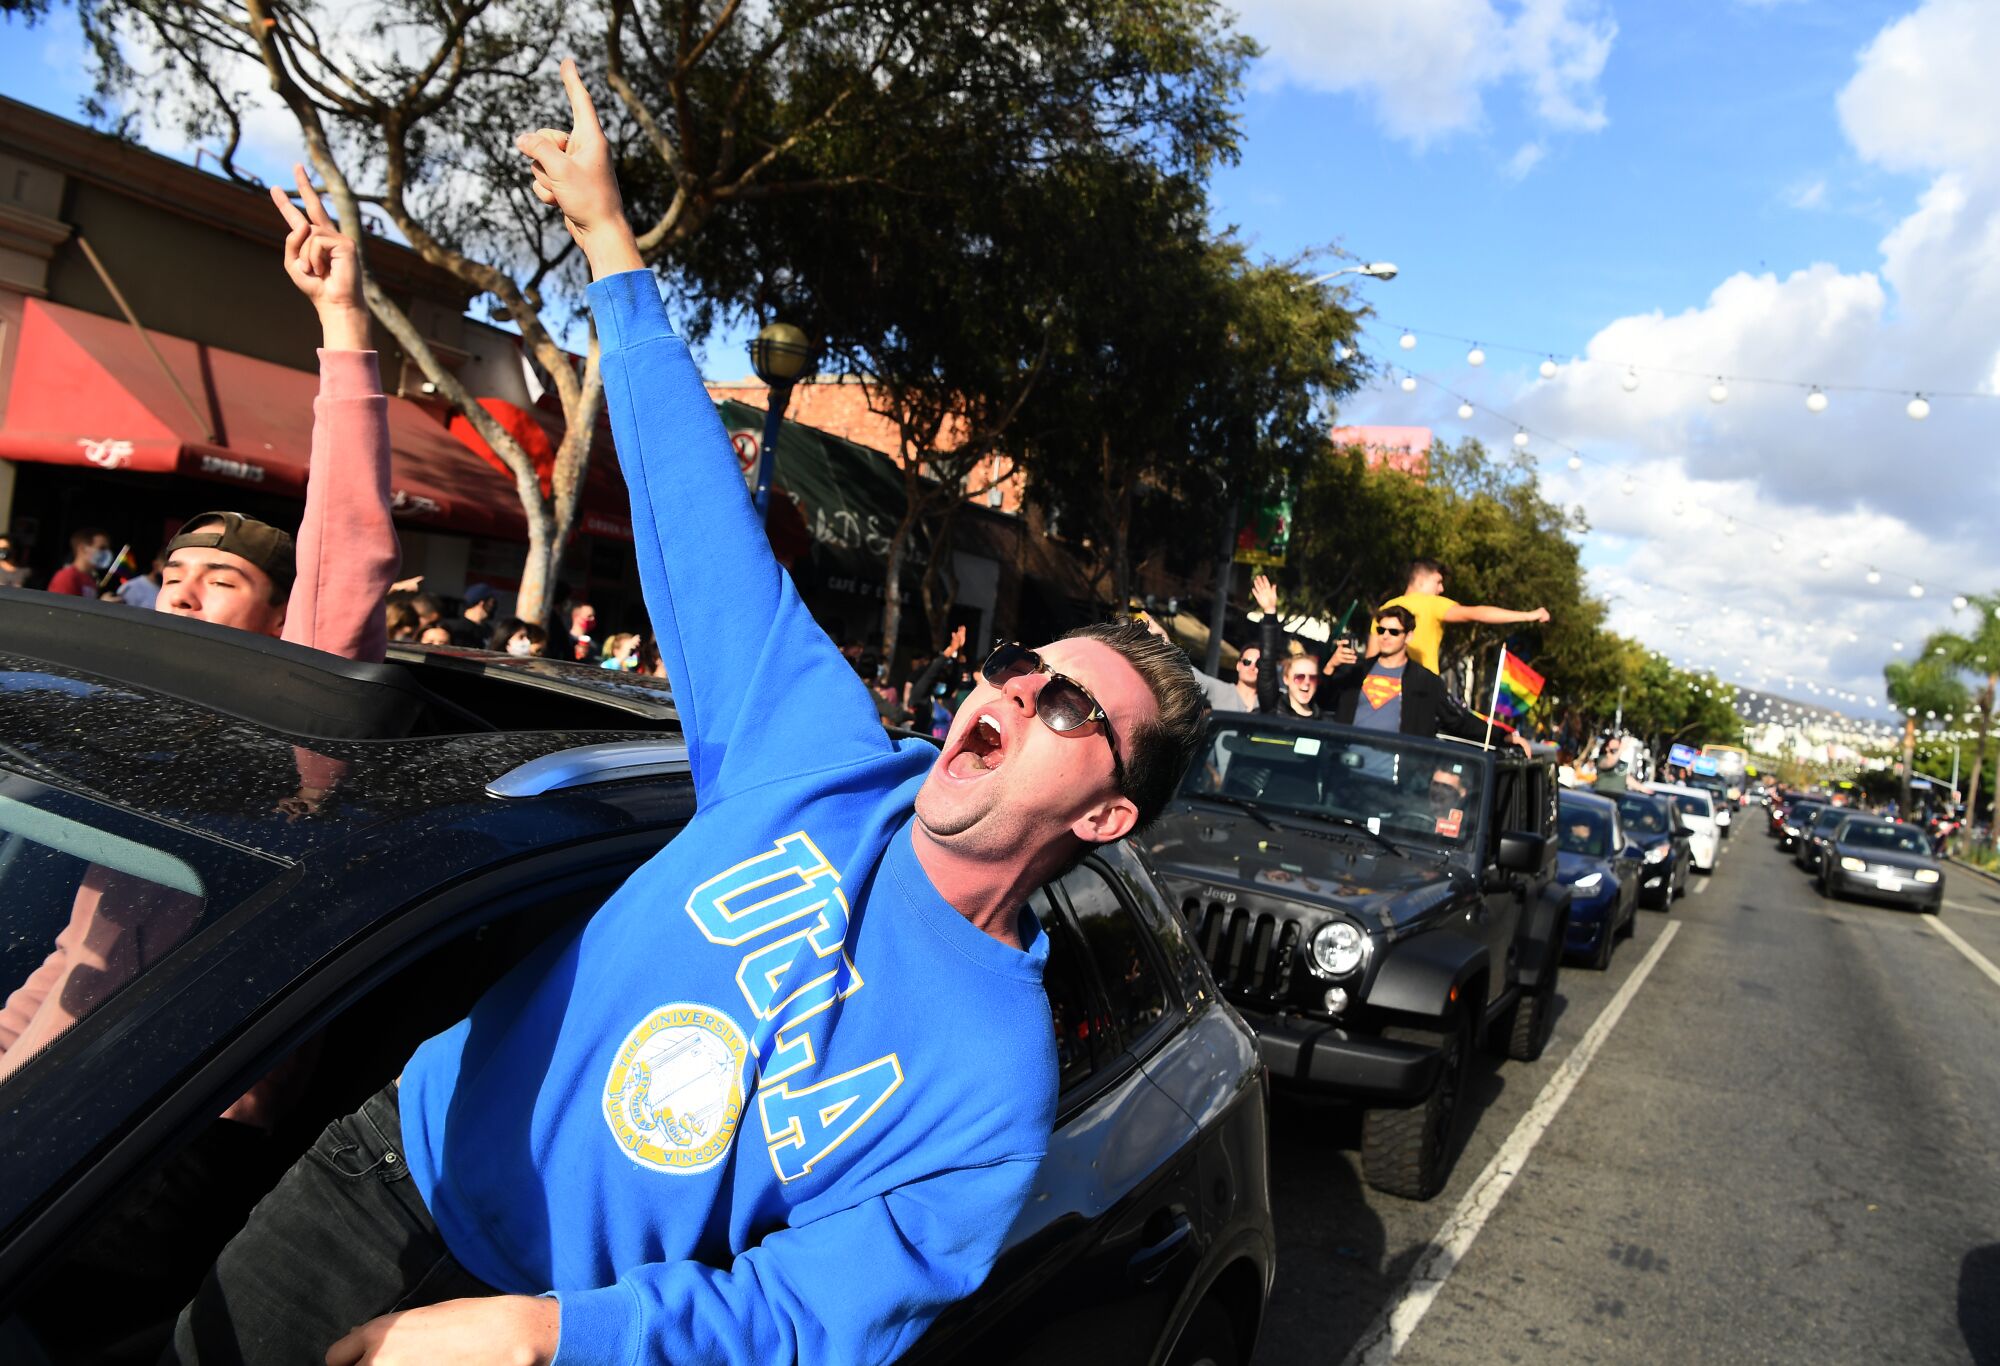 A Biden supporter yells from his car in celebration along Santa Monica Boulevard in West Hollywood.